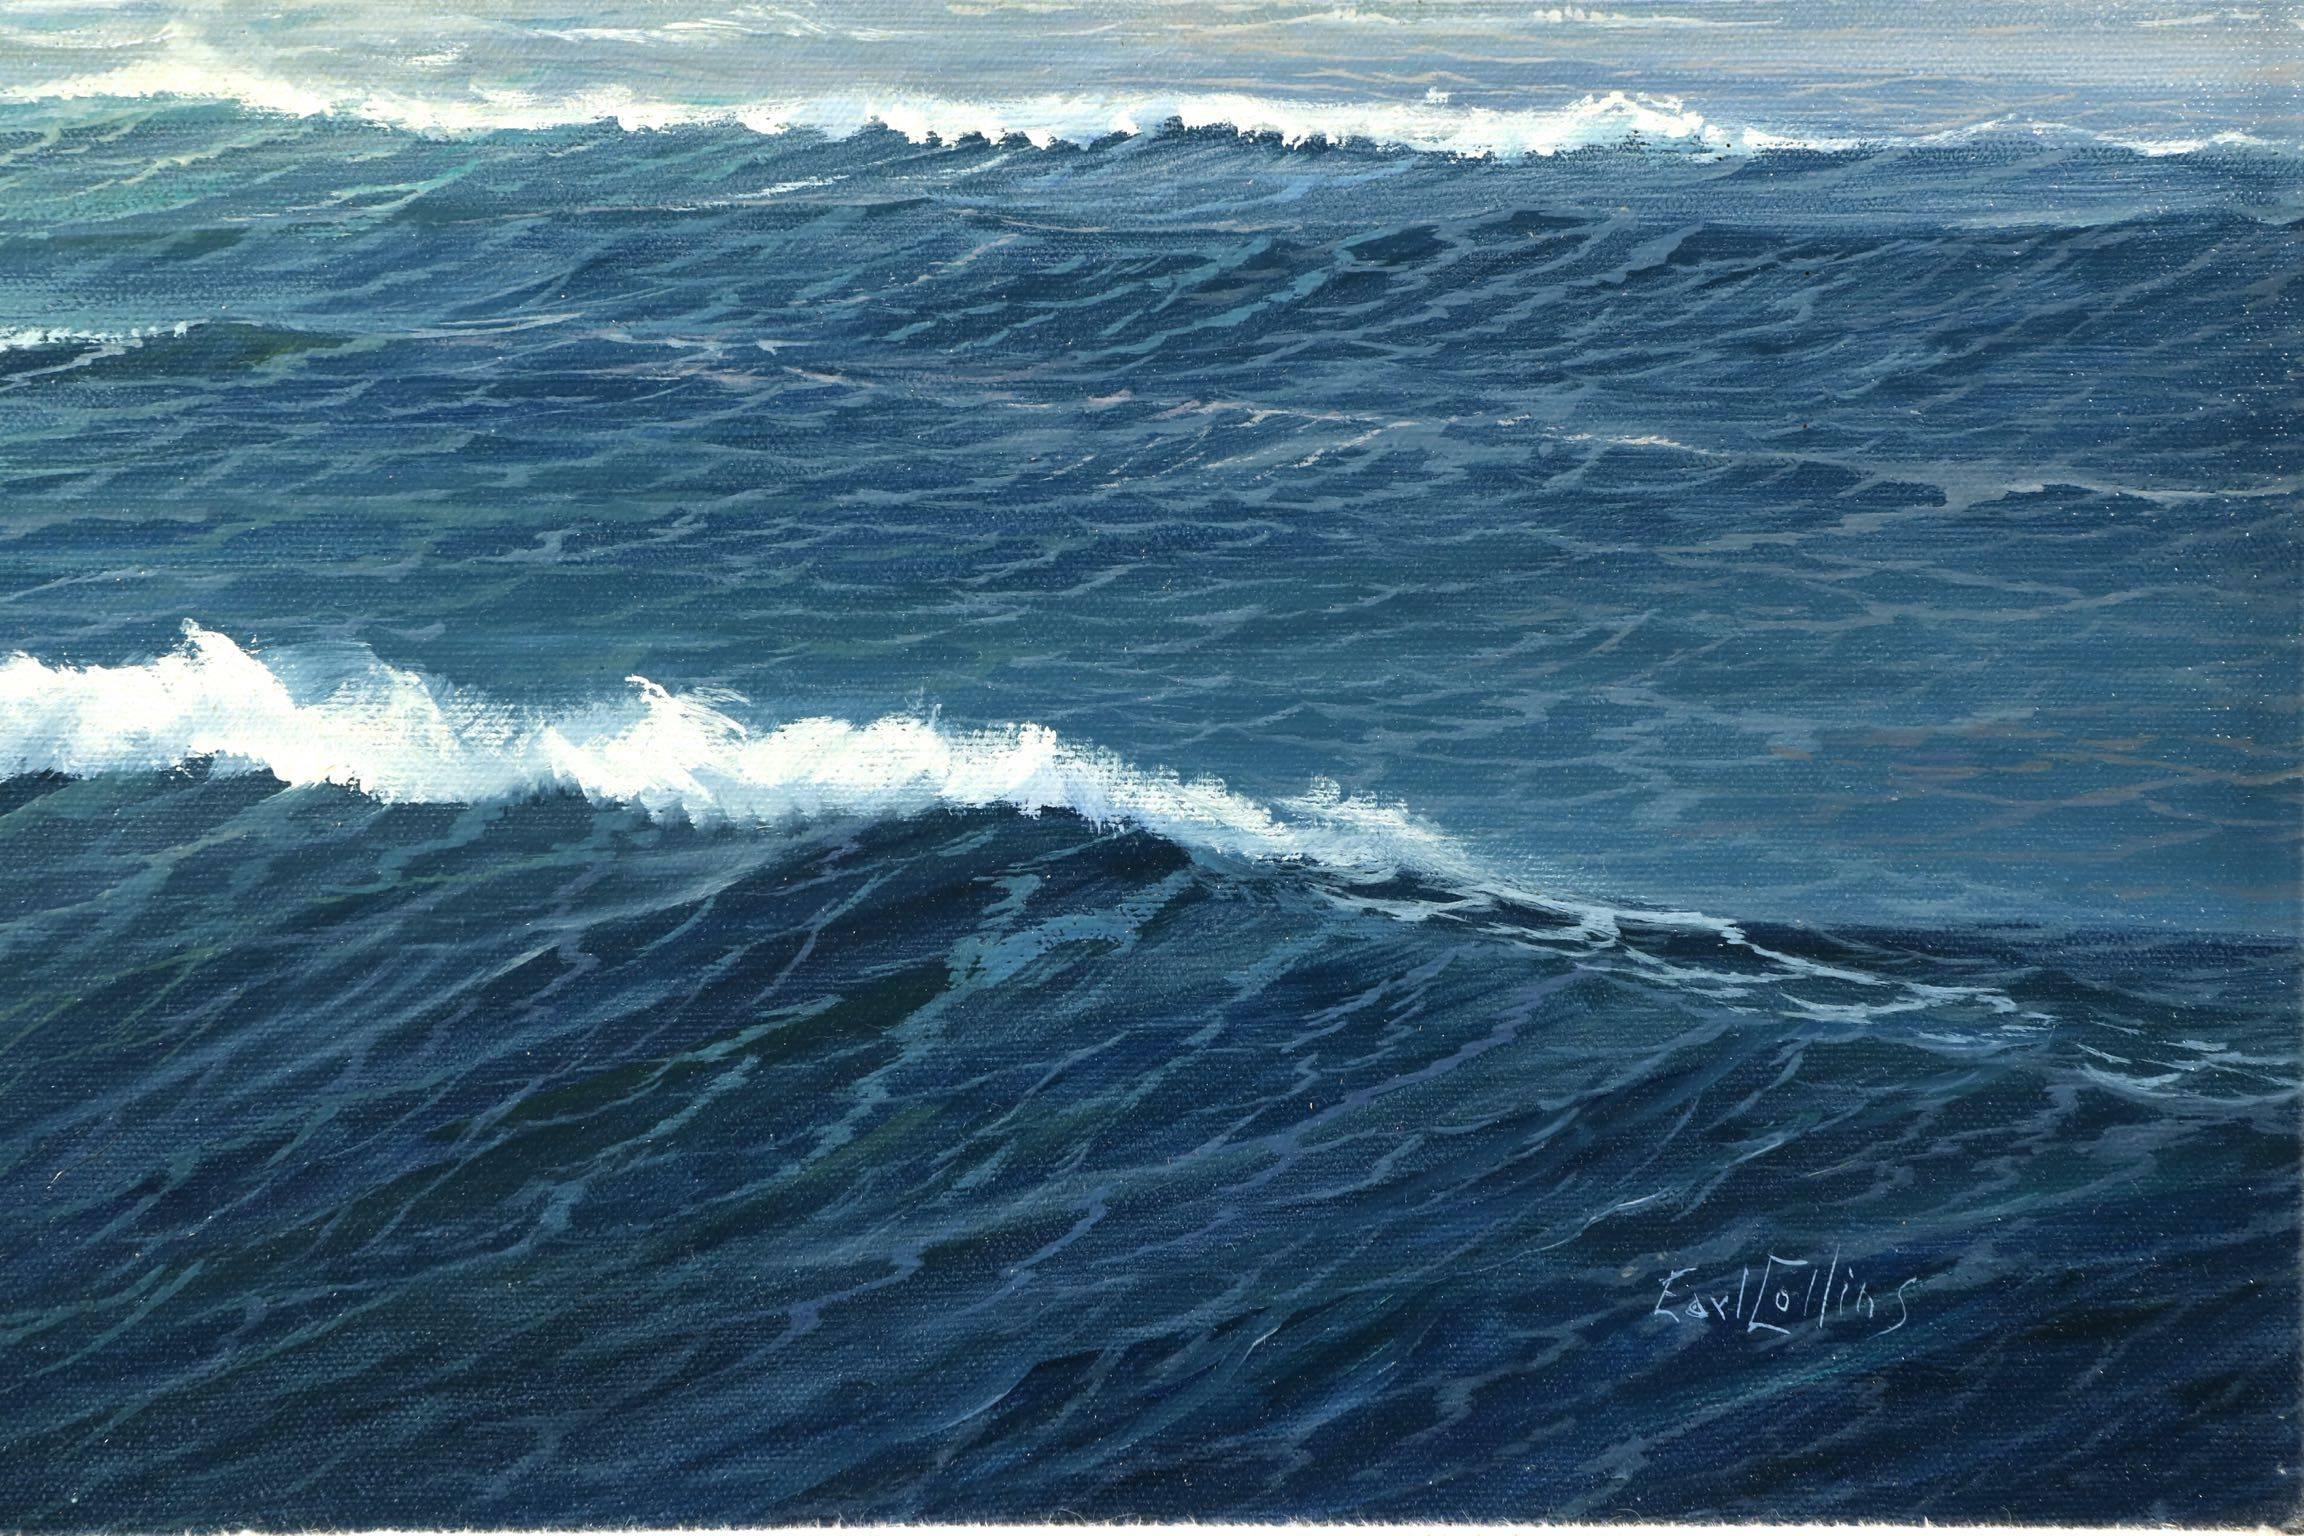 Earl Collins Nautical Marine Oil Painting on Canvas, 